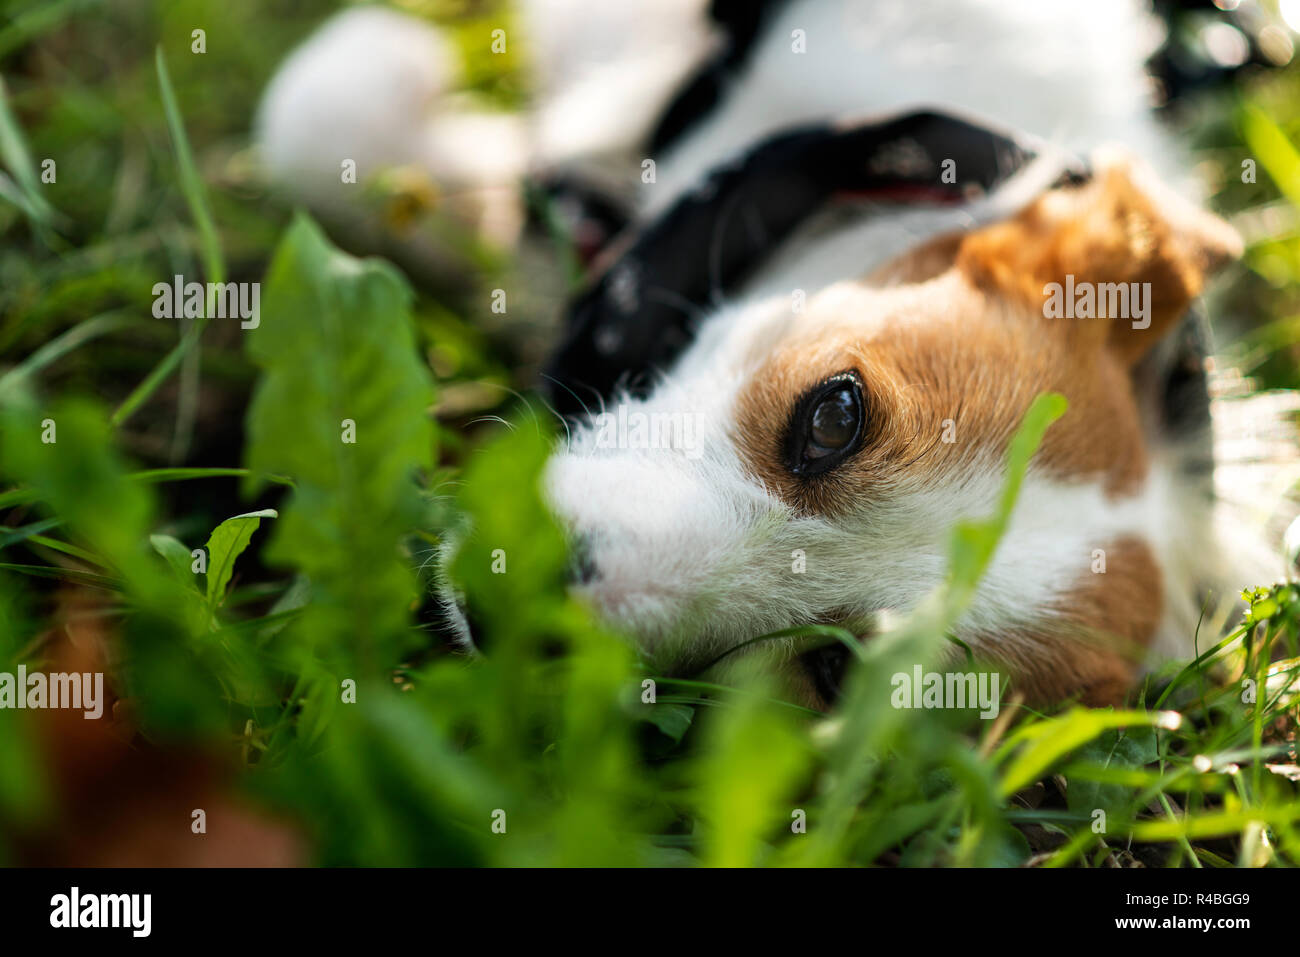 Adopted stray dog lloking from the grass. Stock Photo